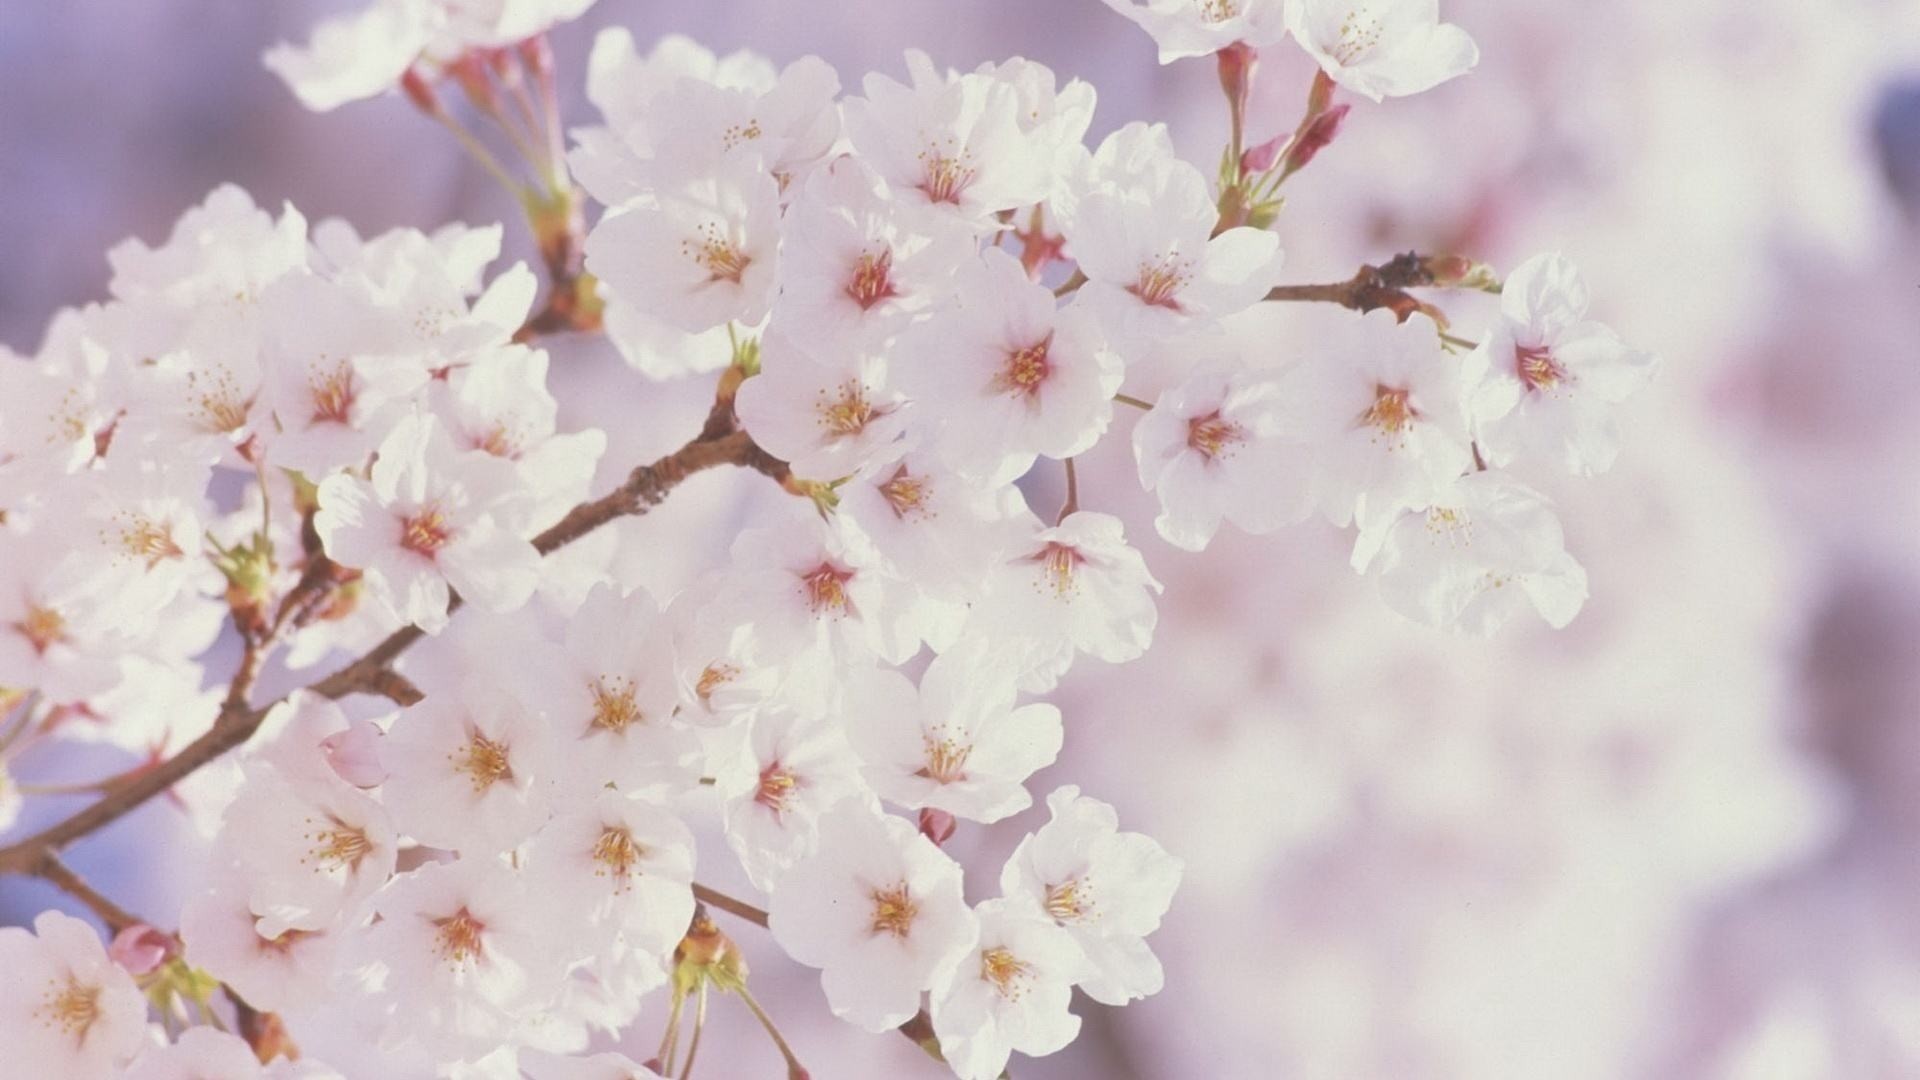 1920x1080, Wallpapers Backgrounds - Spring Background - HD Wallpaper 